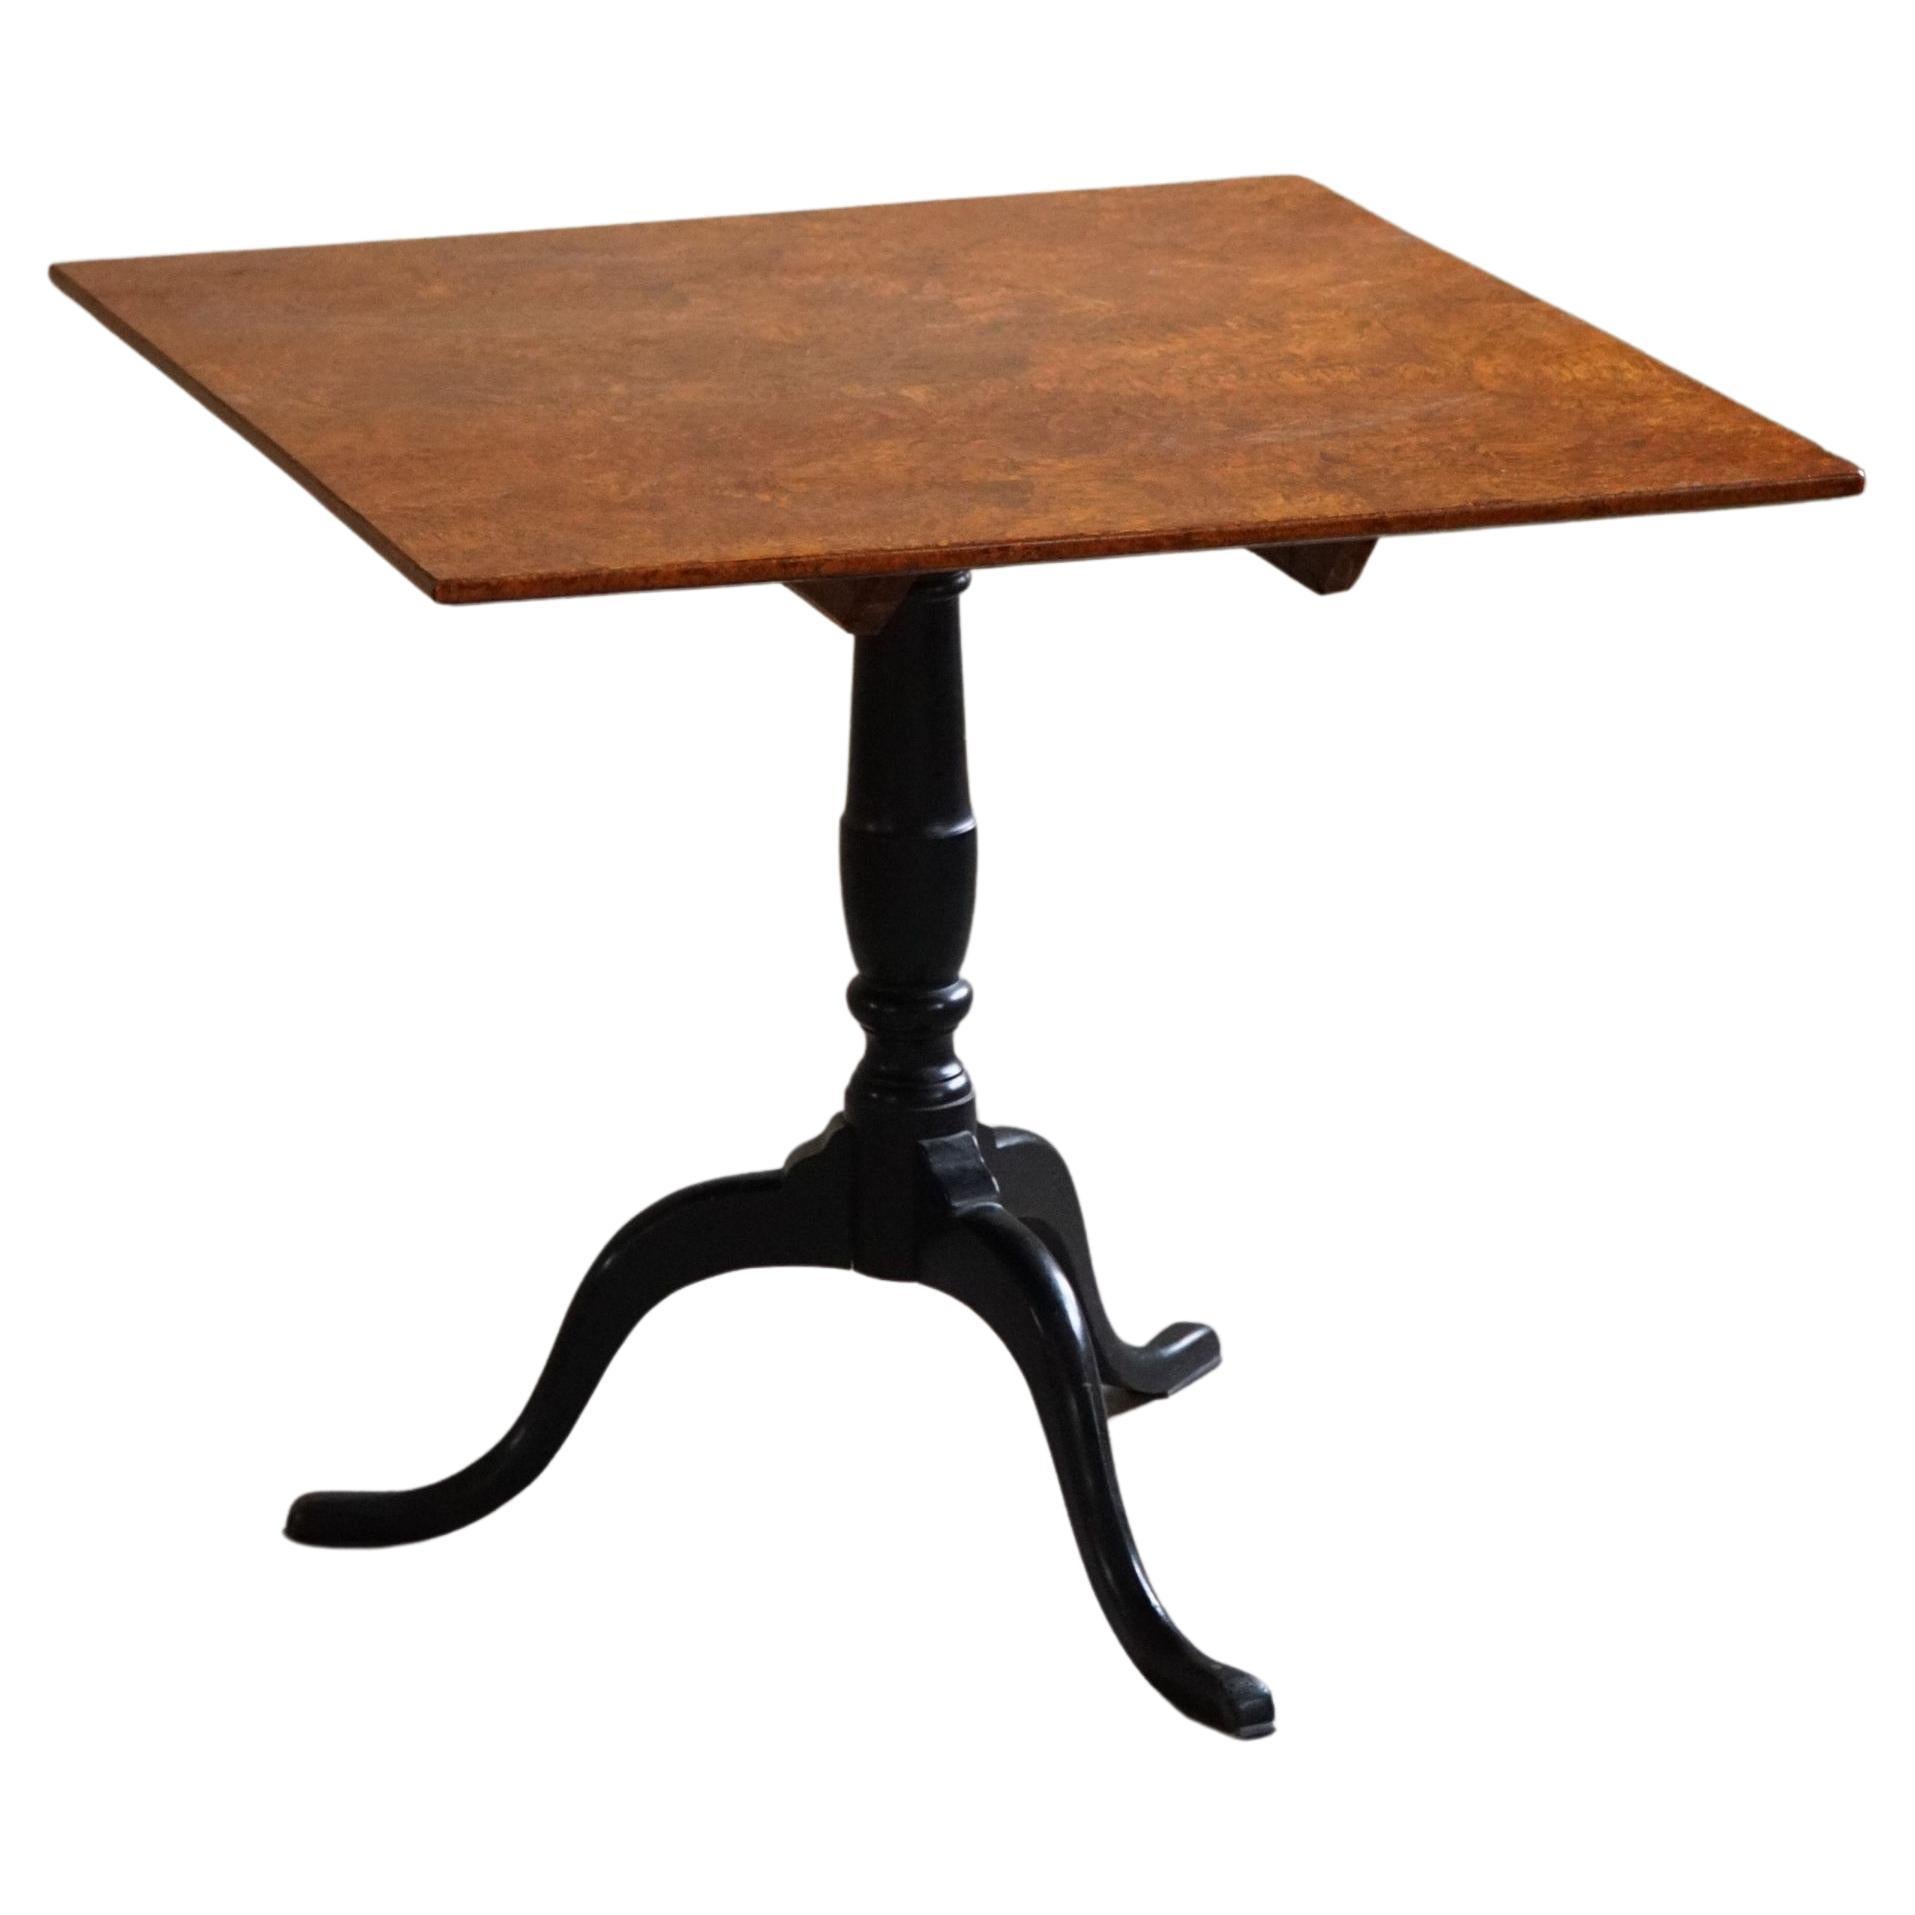 Handcrafted Square Antique Drop Leaf Table in Burl Wood, Swedish, 19th Century For Sale